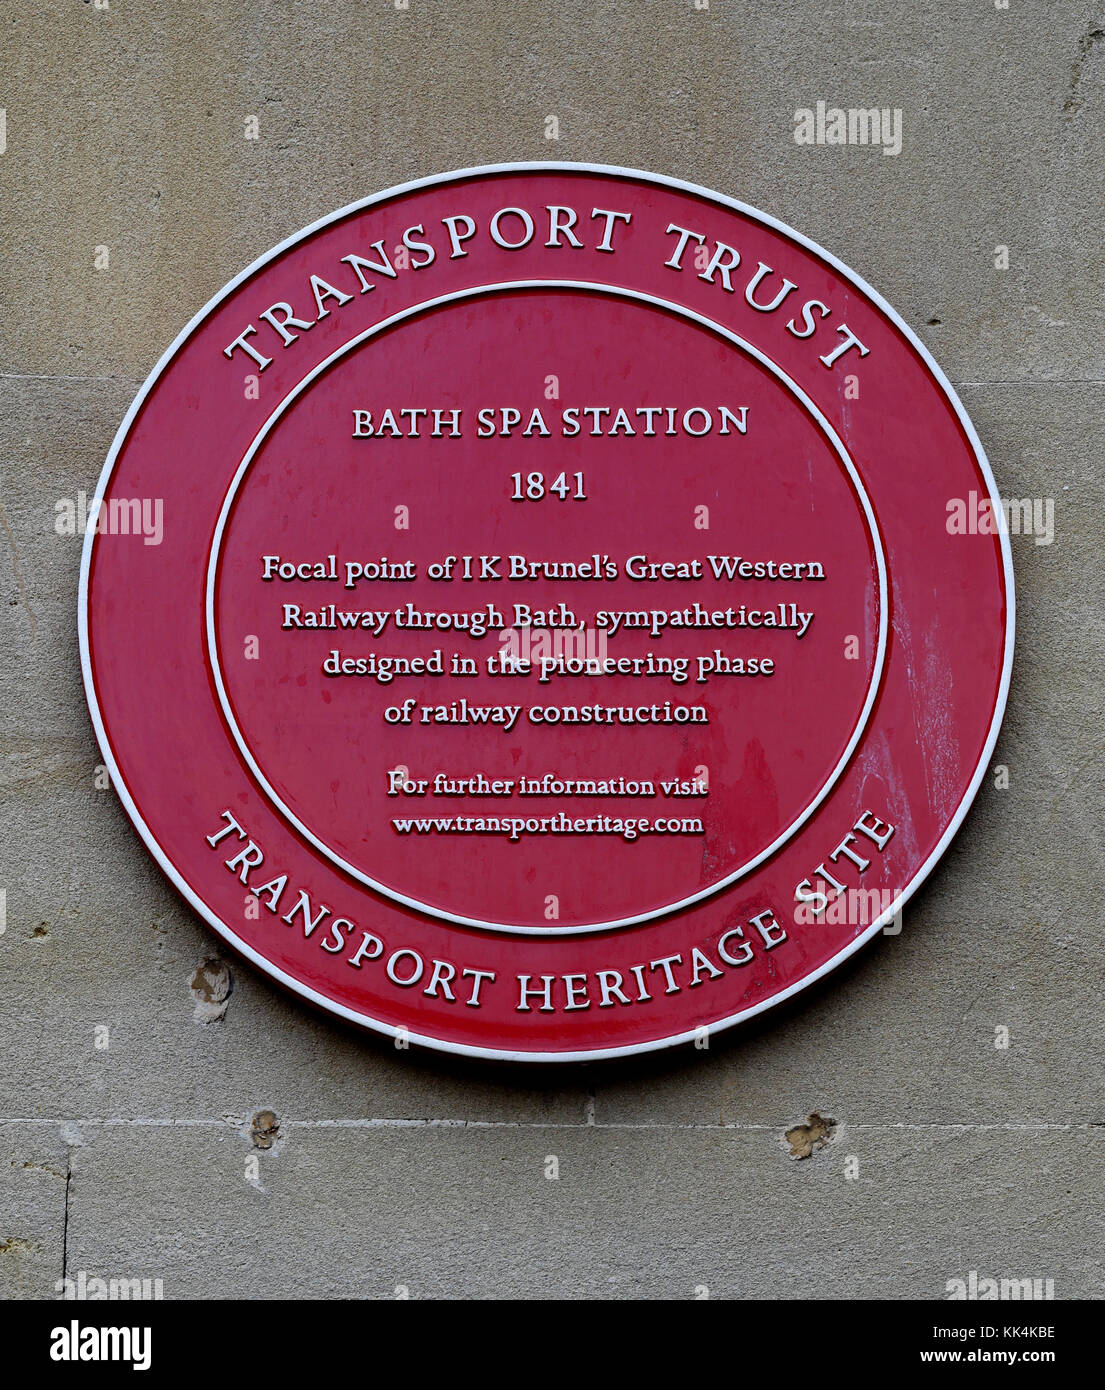 Heritage red plaque - Transport Heritage Site - at Bath Spa Railway Station built in 1841, Bath, Avon, England, UK Stock Photo